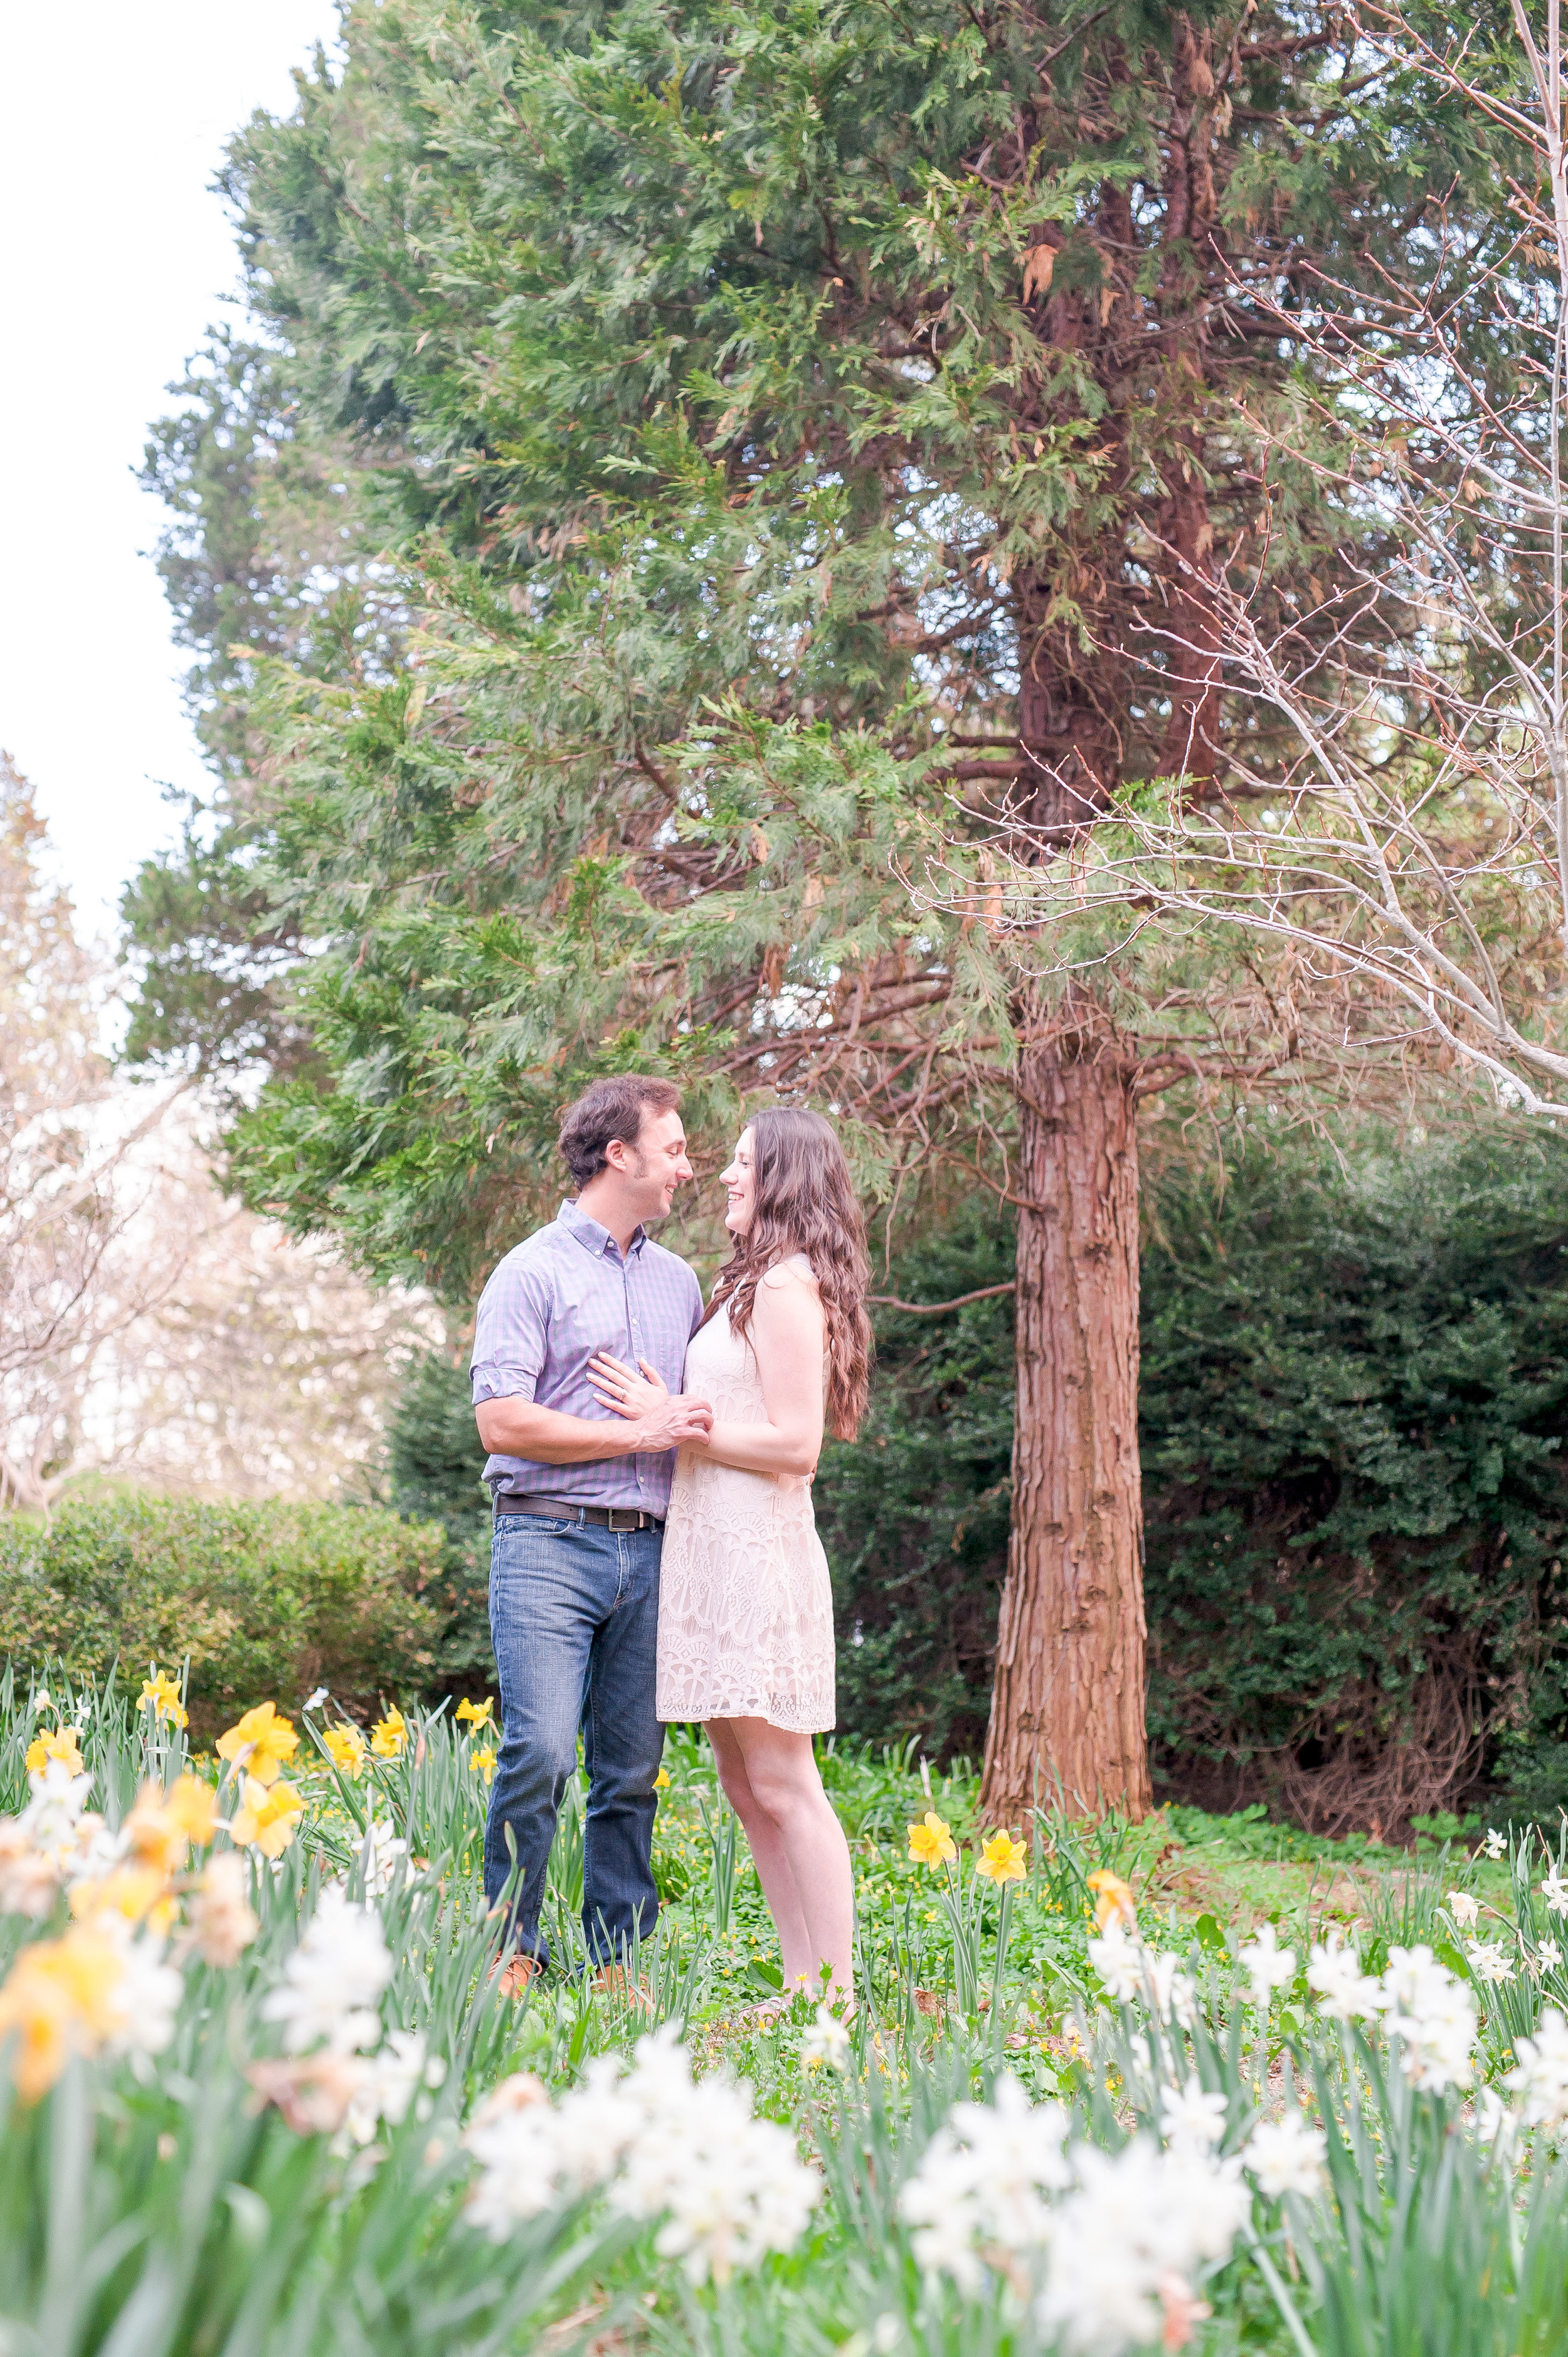 Sean and Nicole Beverly spring blossom engagement-25.jpg